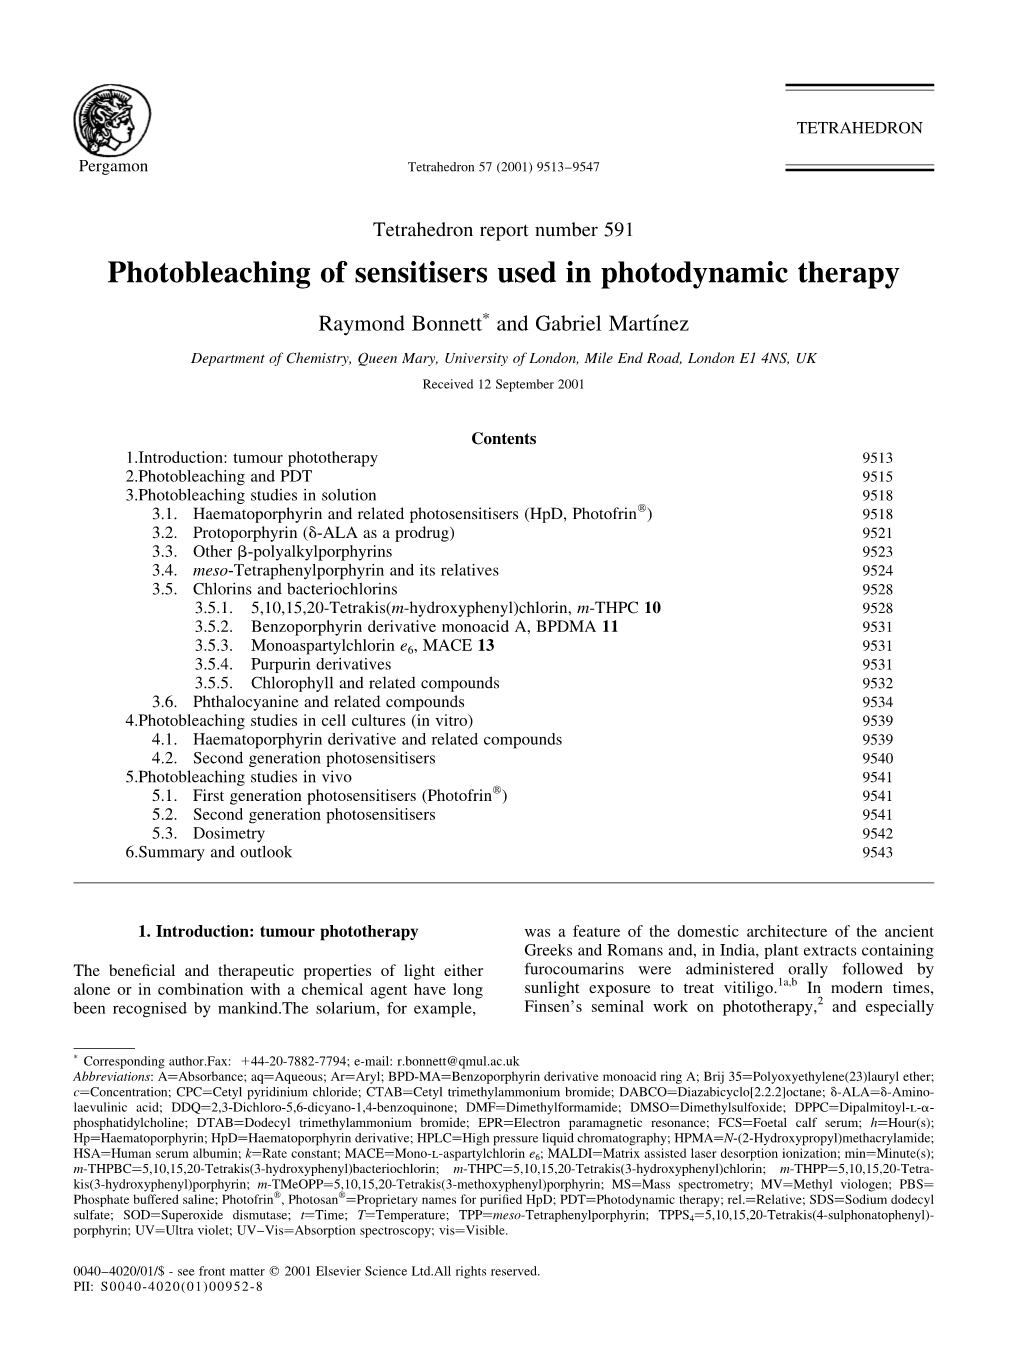 Photobleaching of Sensitisers Used in Photodynamic Therapy